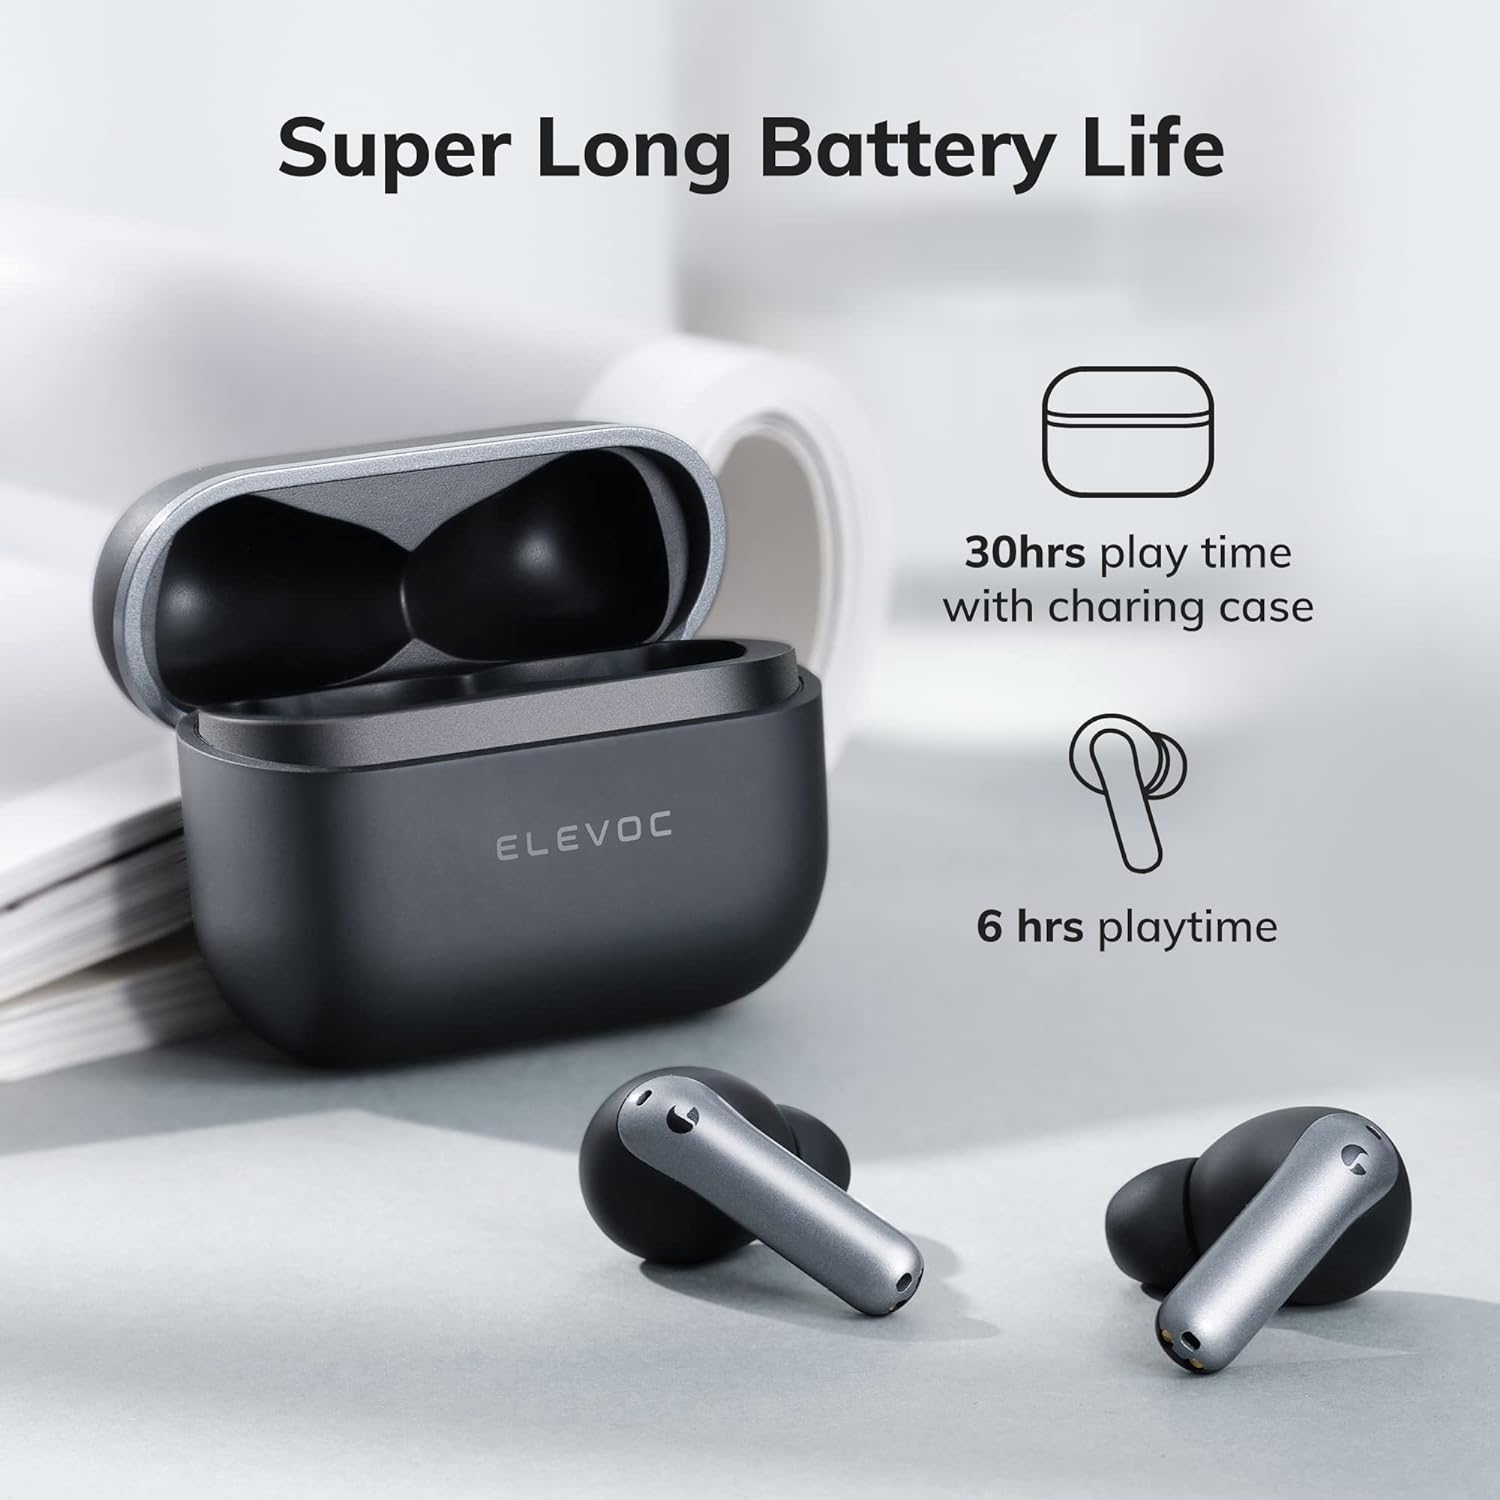 ELEVOC Active Noise Cancelling Earbuds - $140